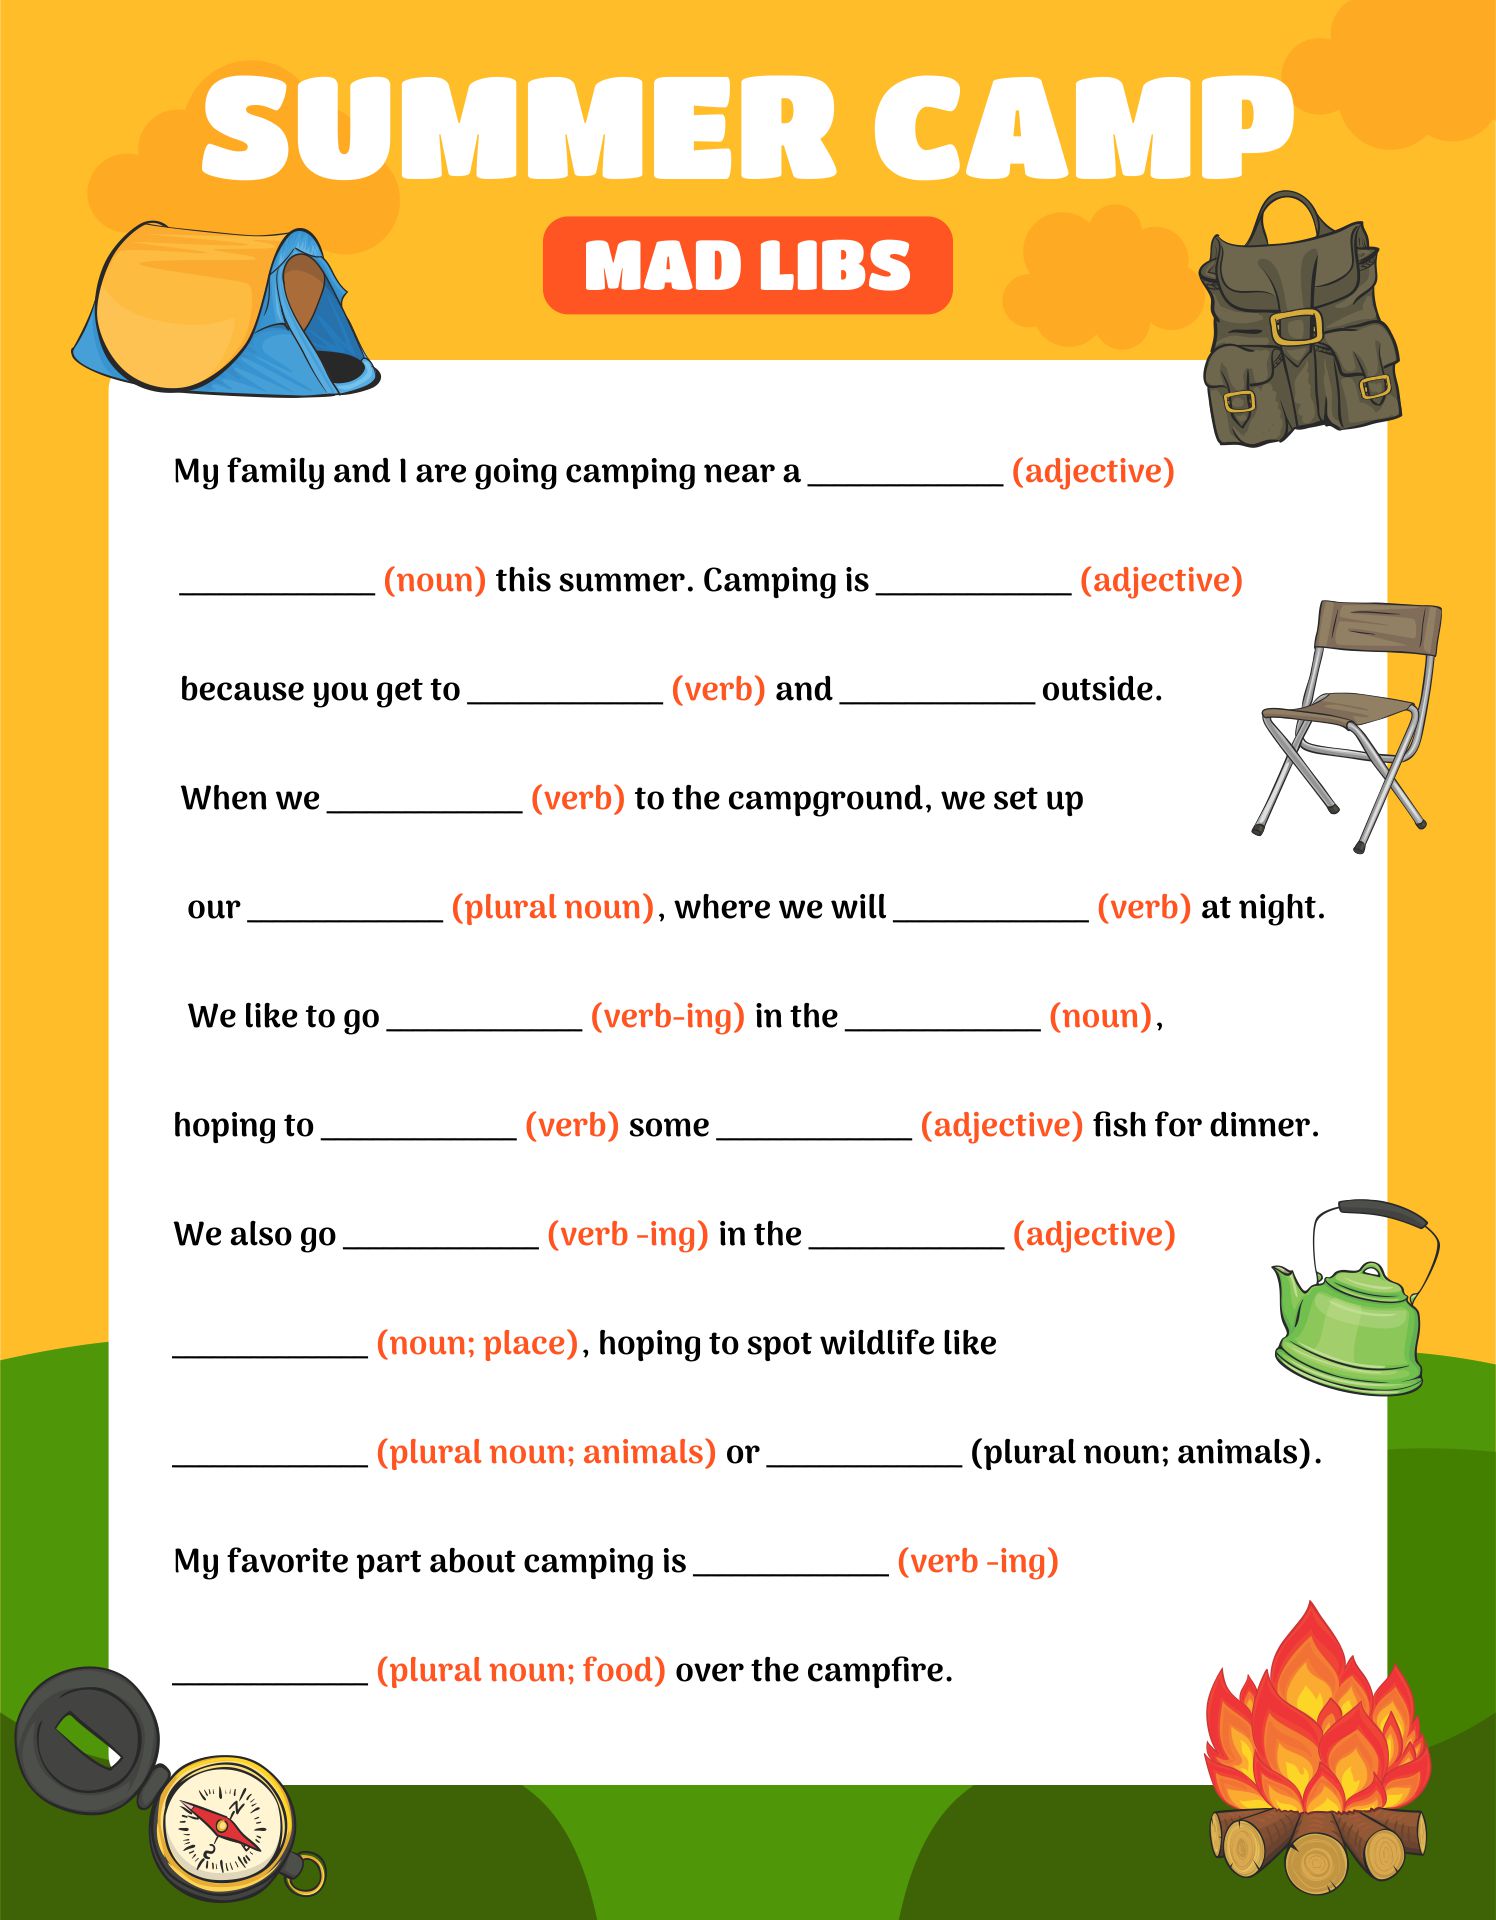 free-mad-lib-template-birthday-cake-mad-libs-printable-with-images